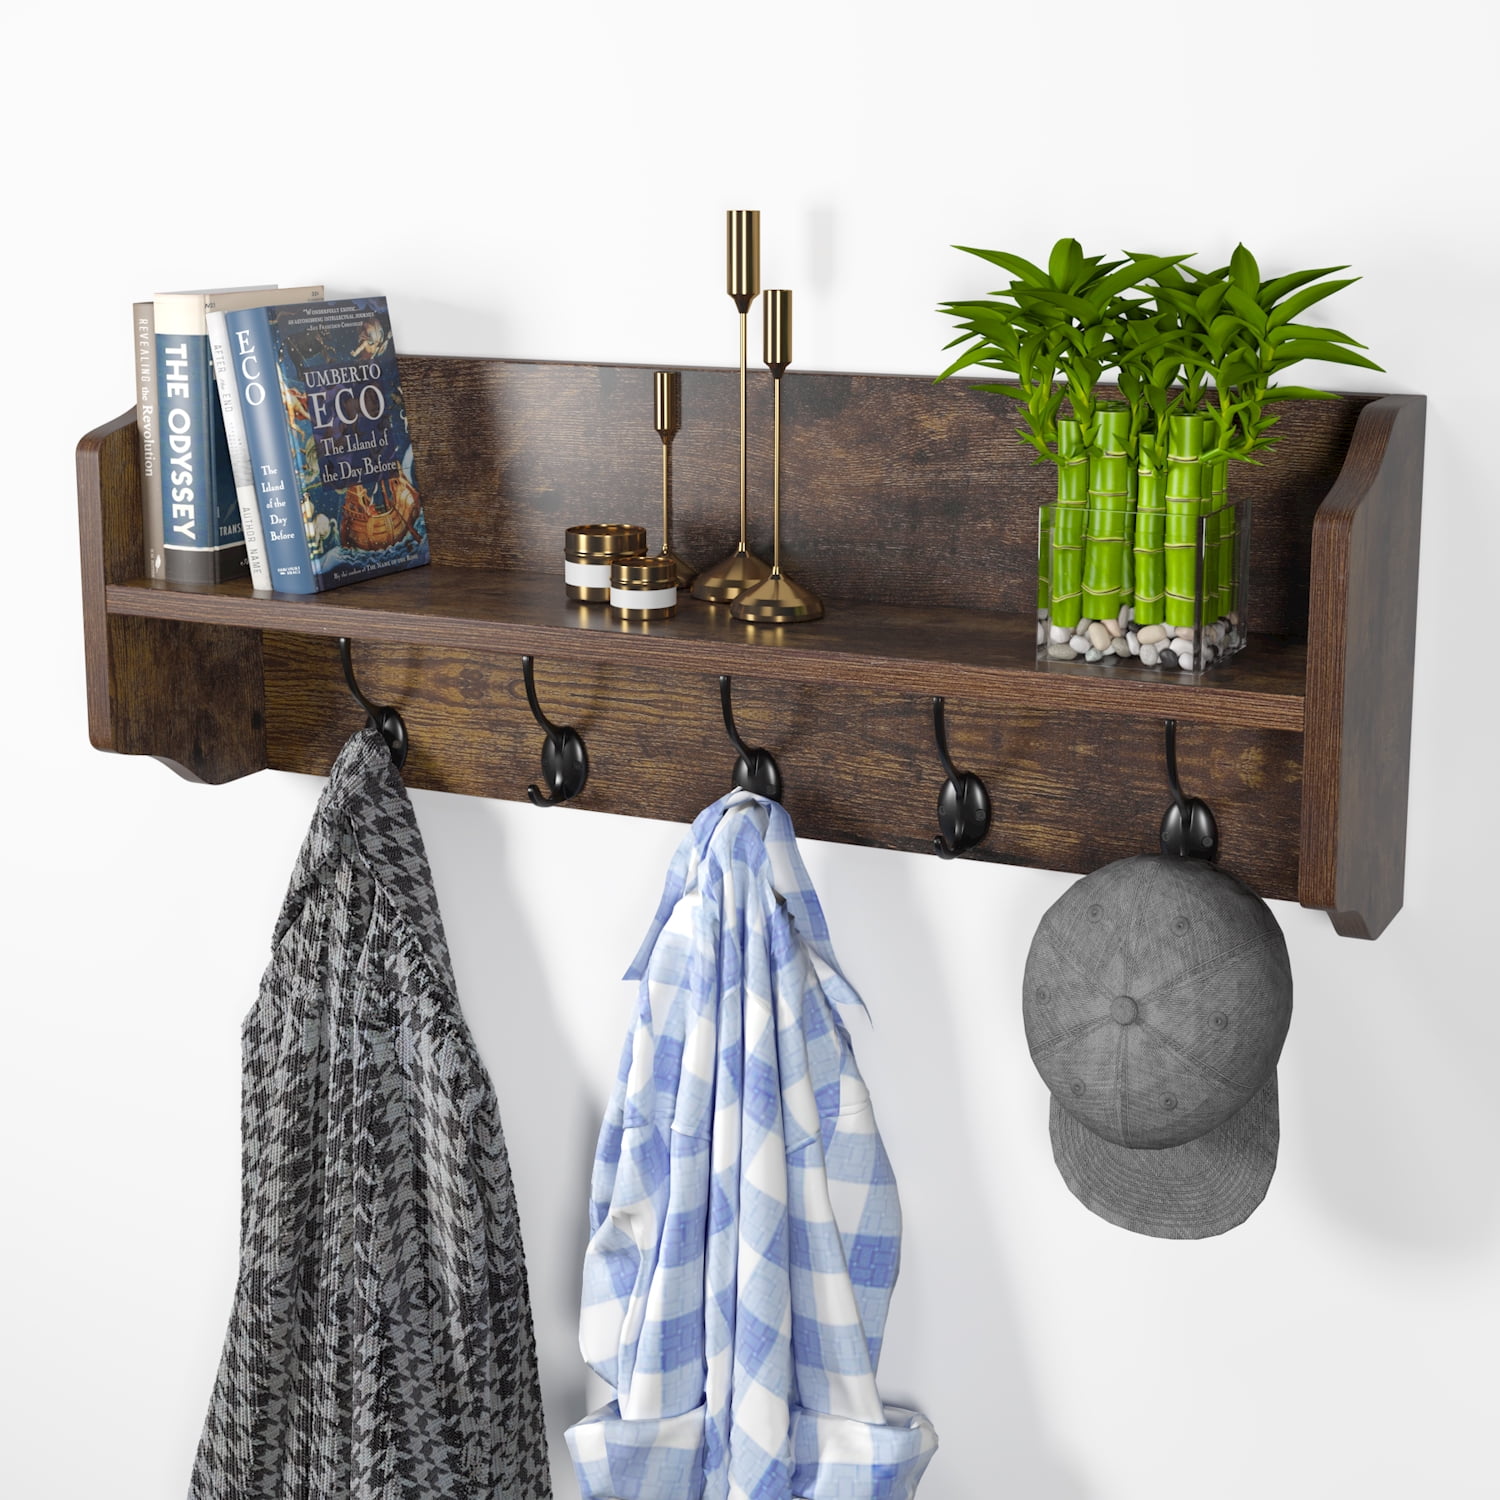 Rustic Wall Mounted Coat Rack with Shelves - Perfect for Small Spaces